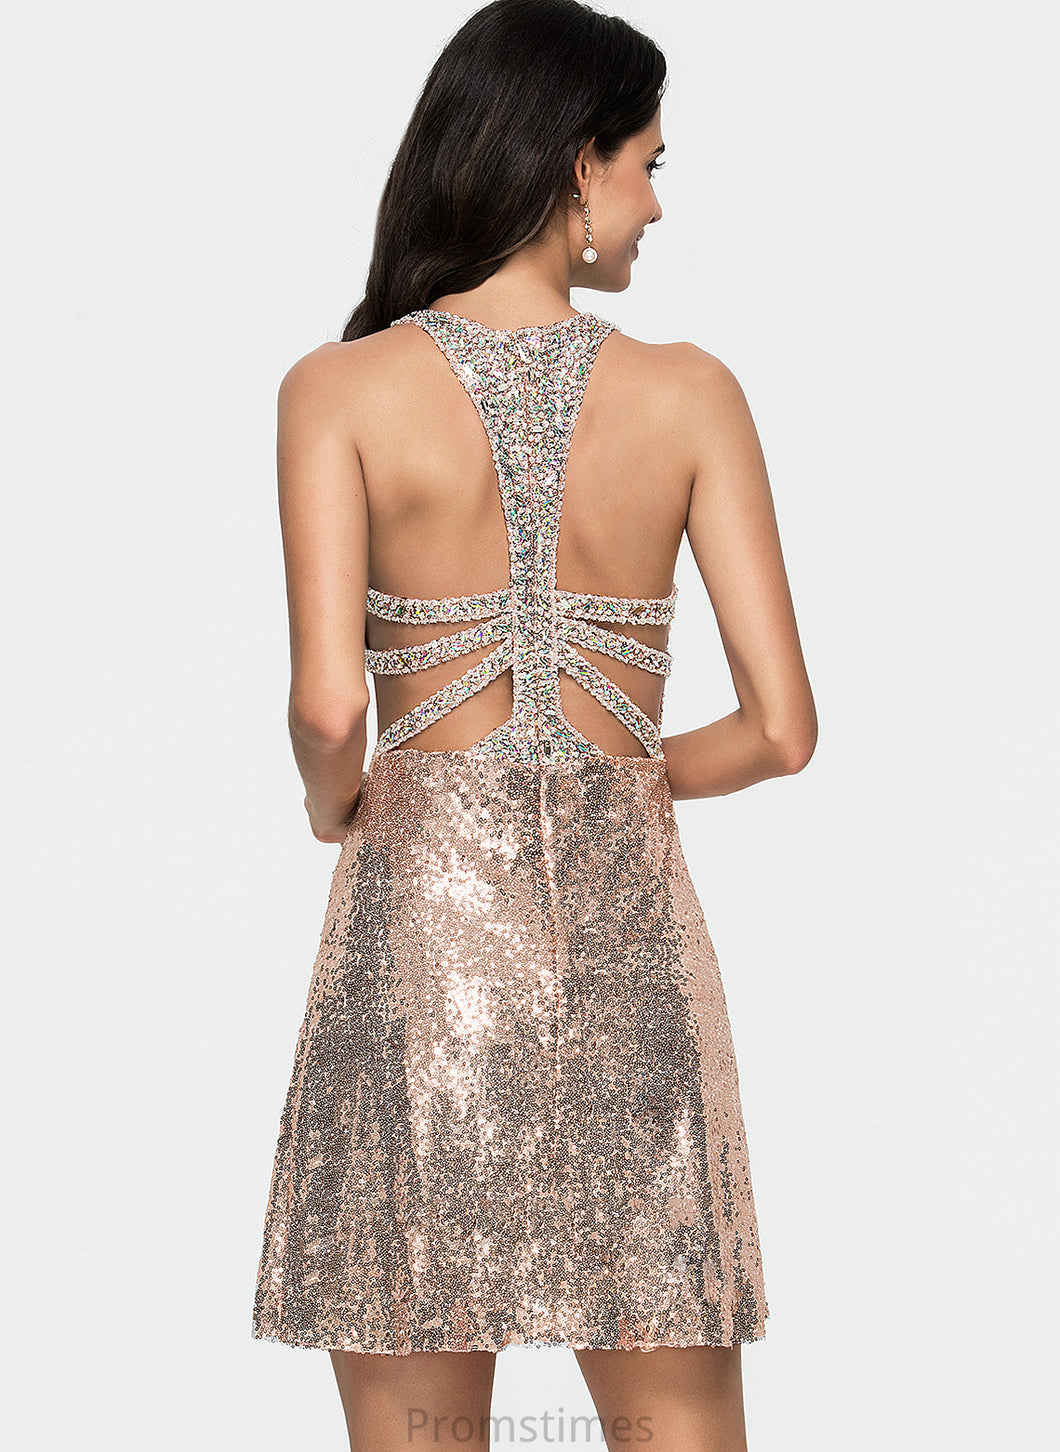 Scoop Short/Mini A-Line Sequins Kristina Sequined Homecoming Dresses Neck Dress With Homecoming